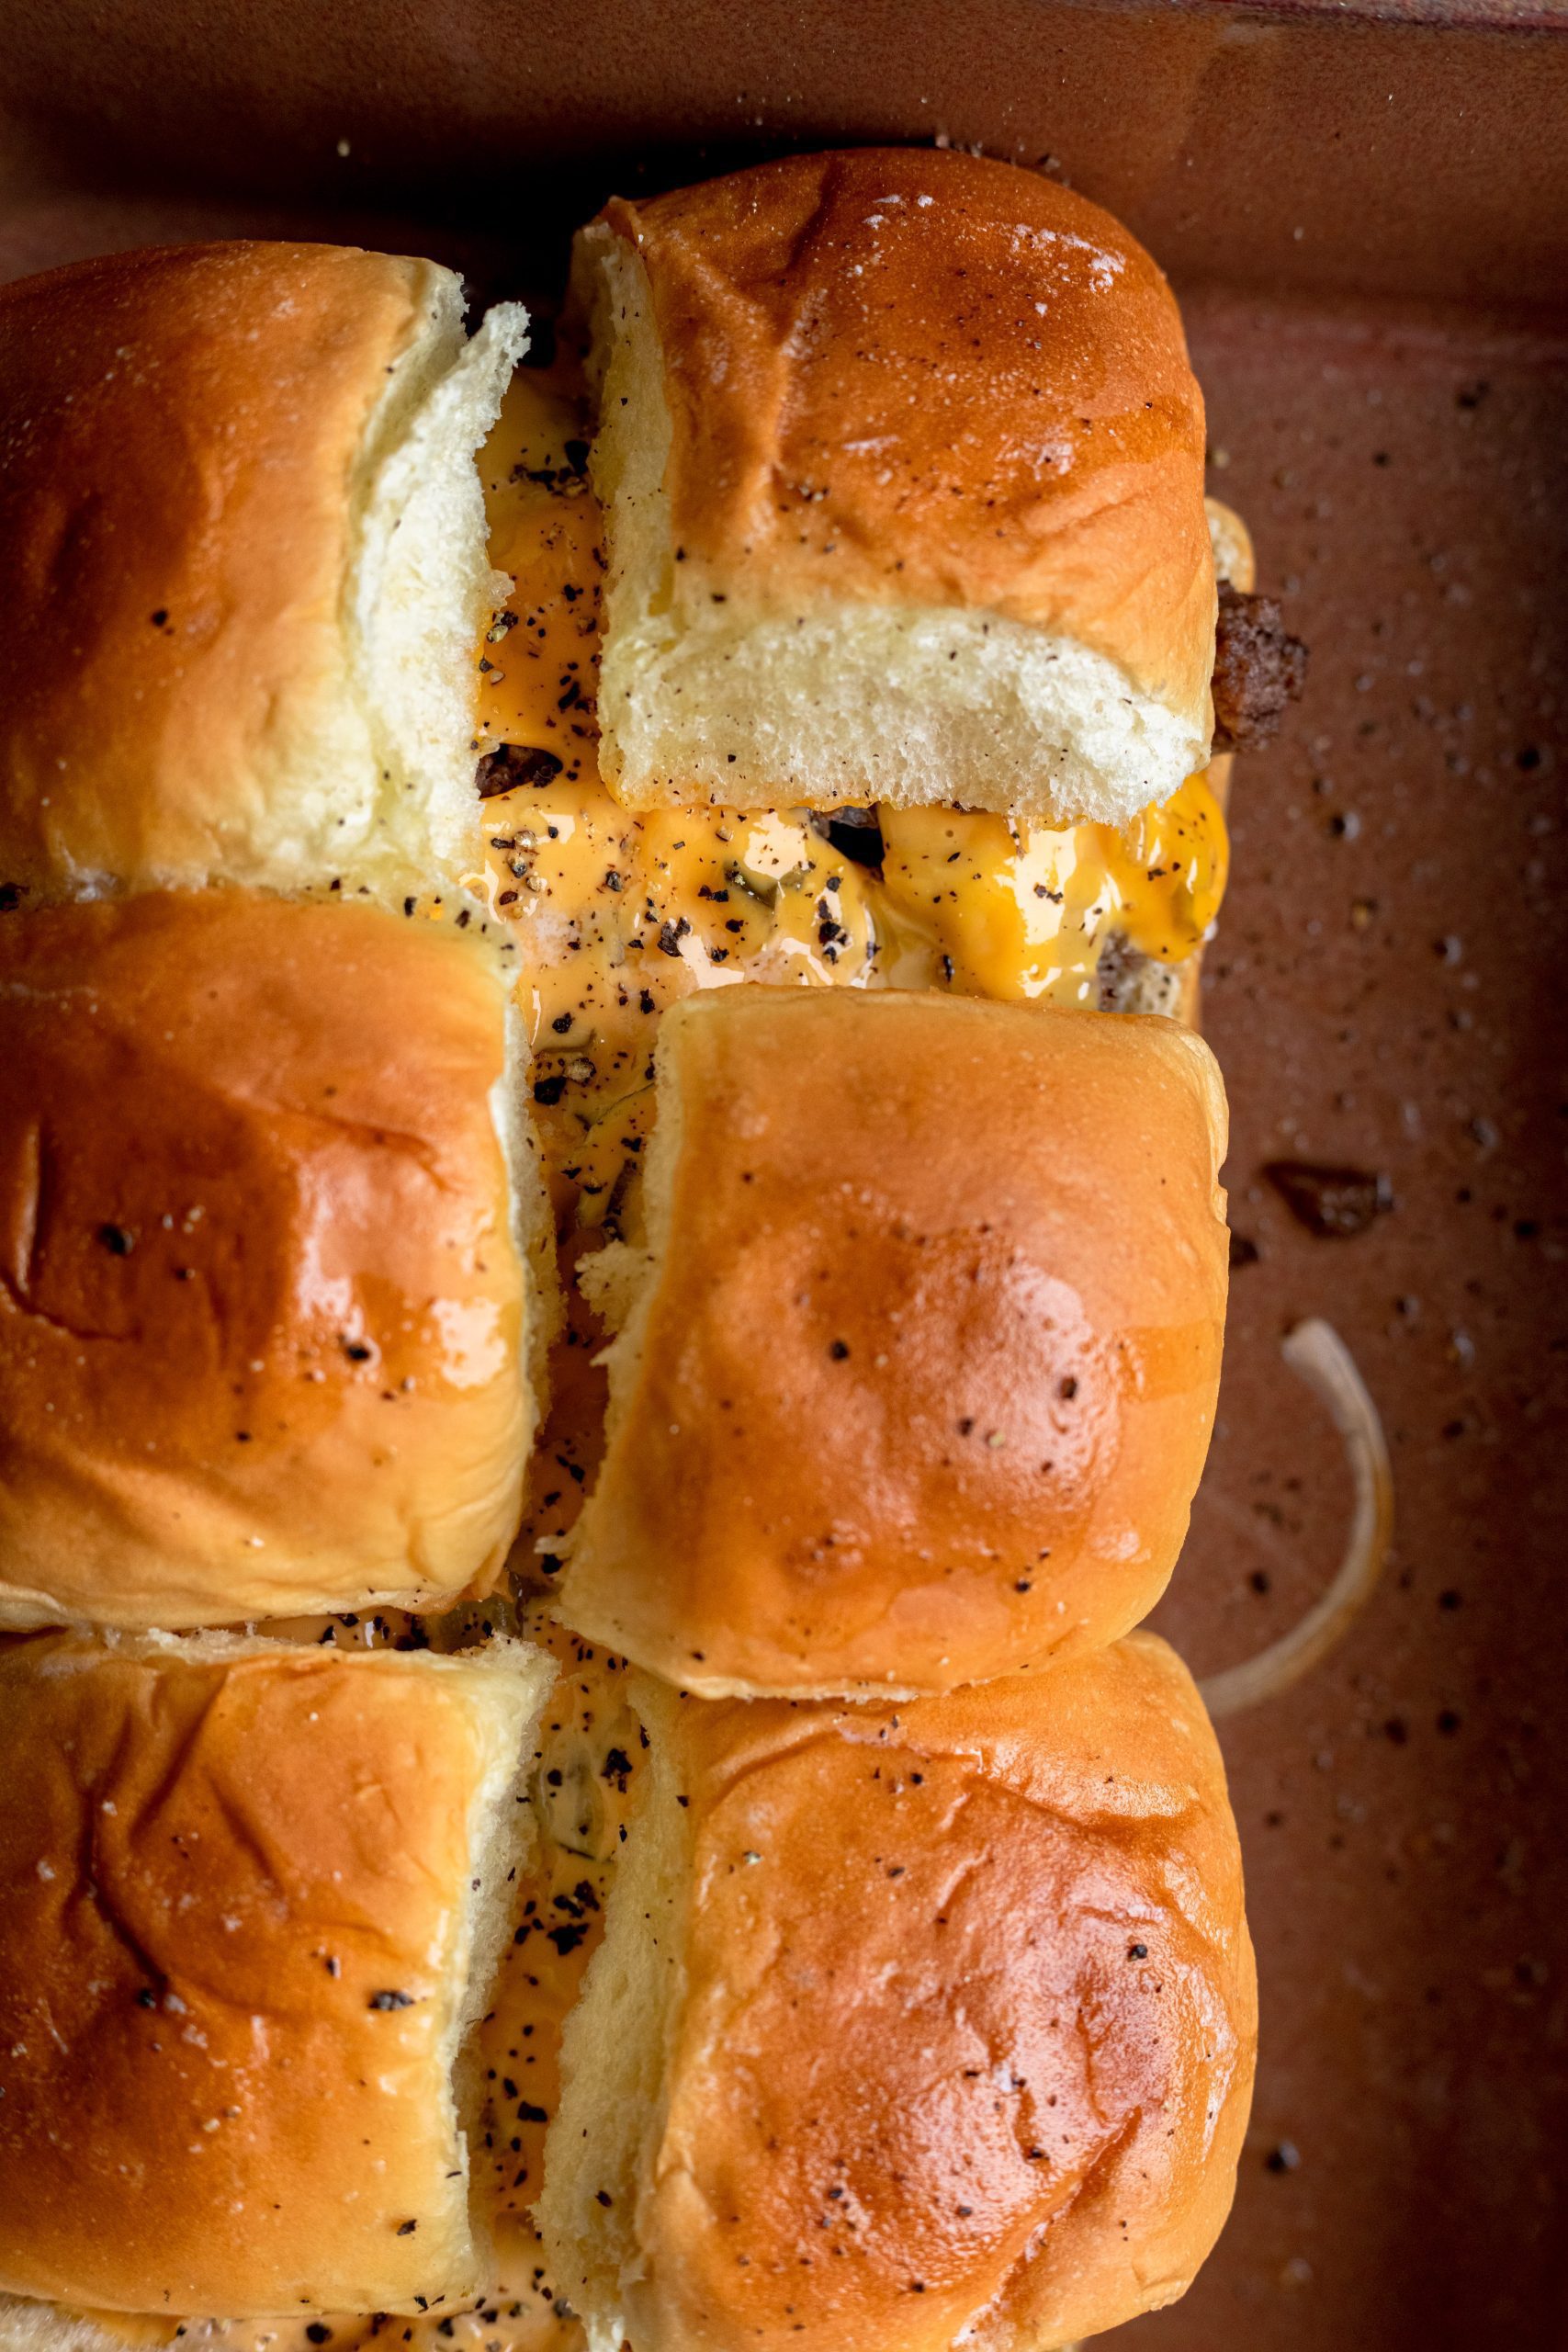 Overhead shot of a pan full of freshly baked cheeseburger sliders with melted cheese and generous seasoning.